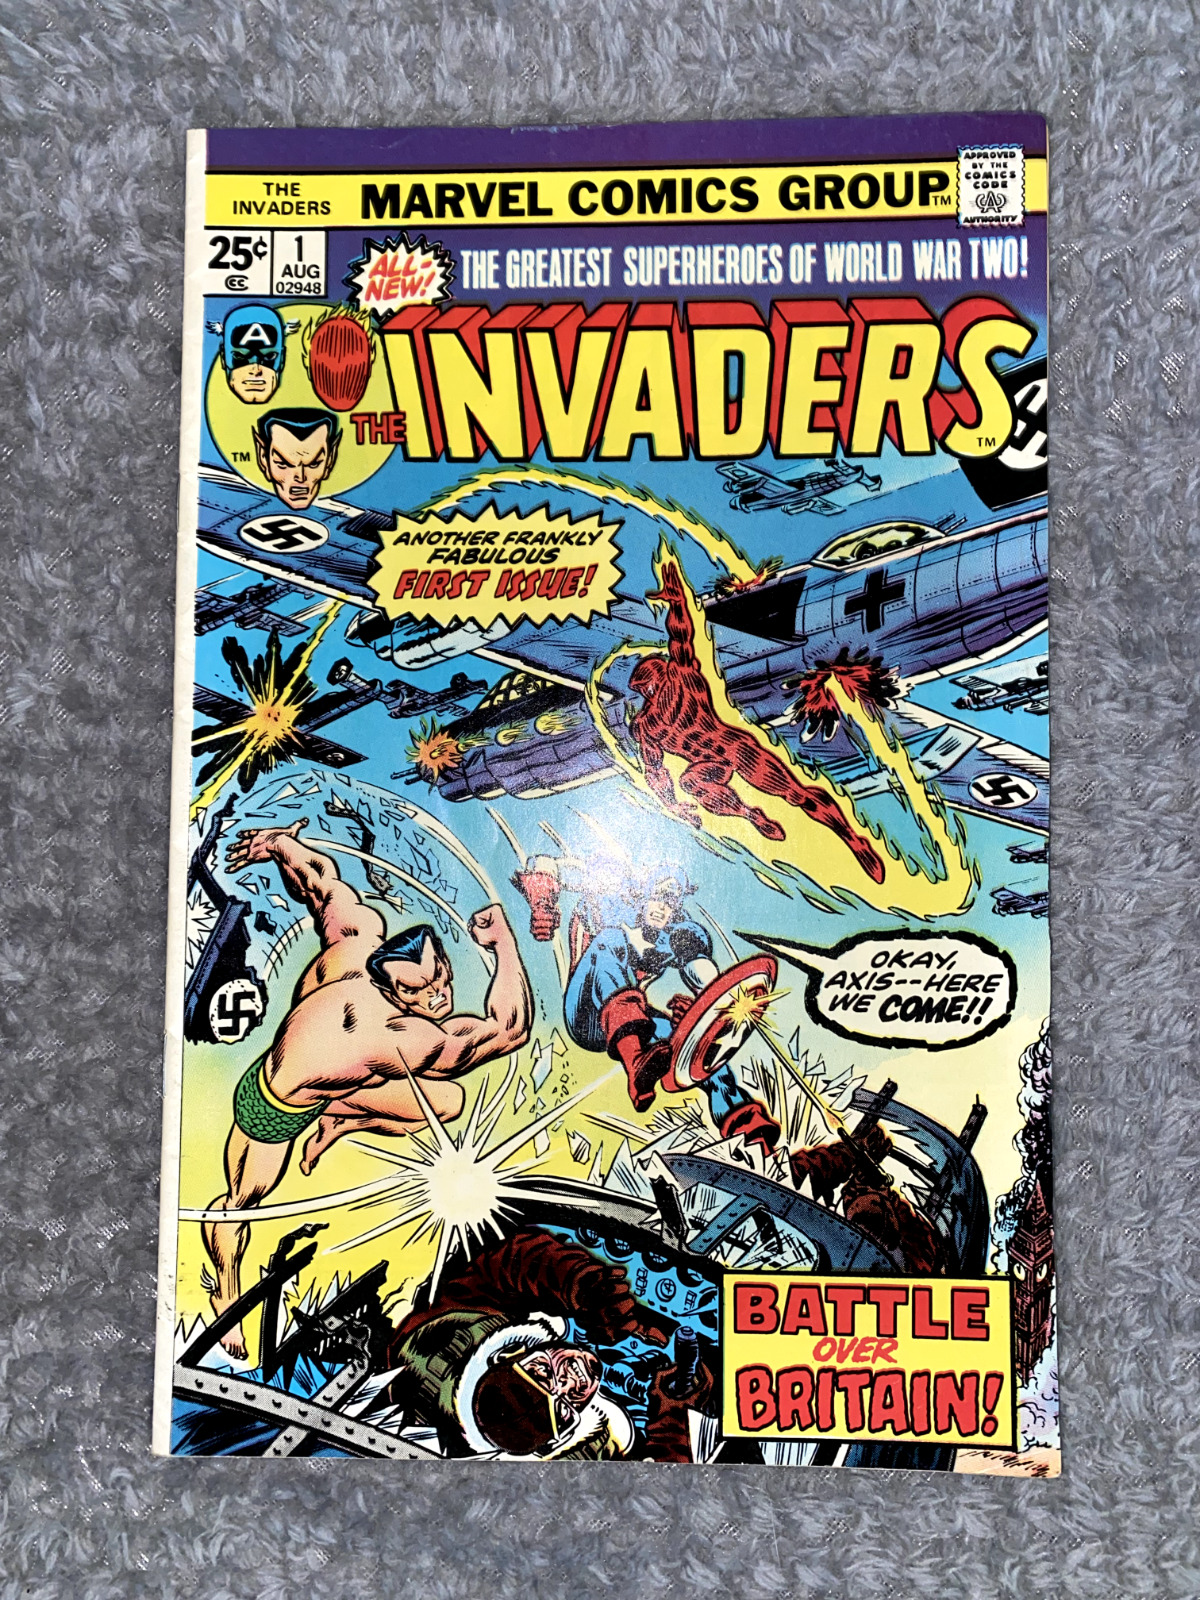 🔥INVADERS #1 / 1ST TEAM APPEARANCE OF THE INVADERS /MARVEL COMICS🔥